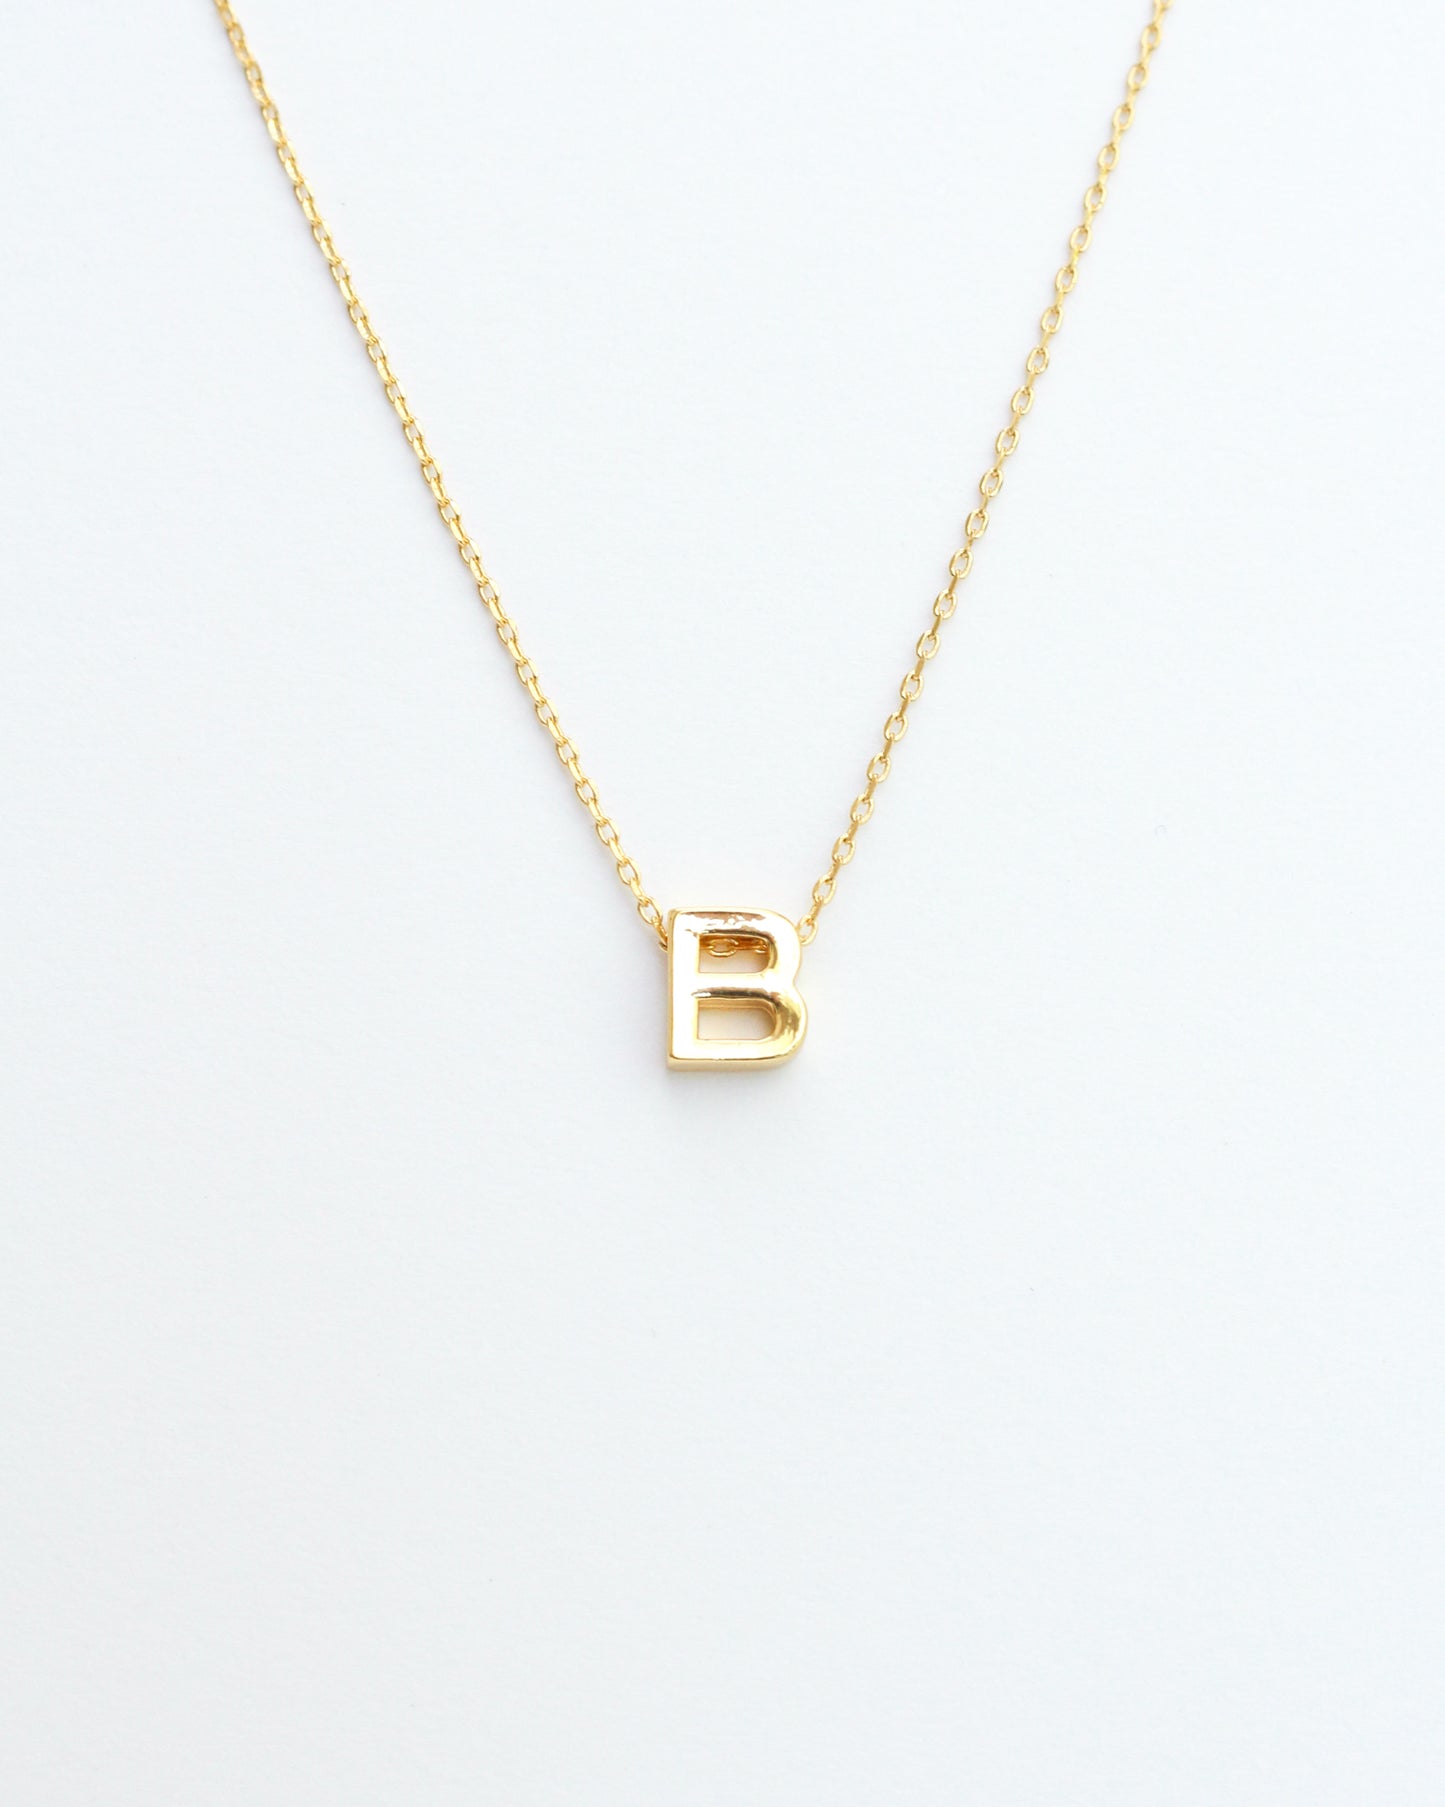 Gold Initial Letter Block Necklace. Letter B necklace